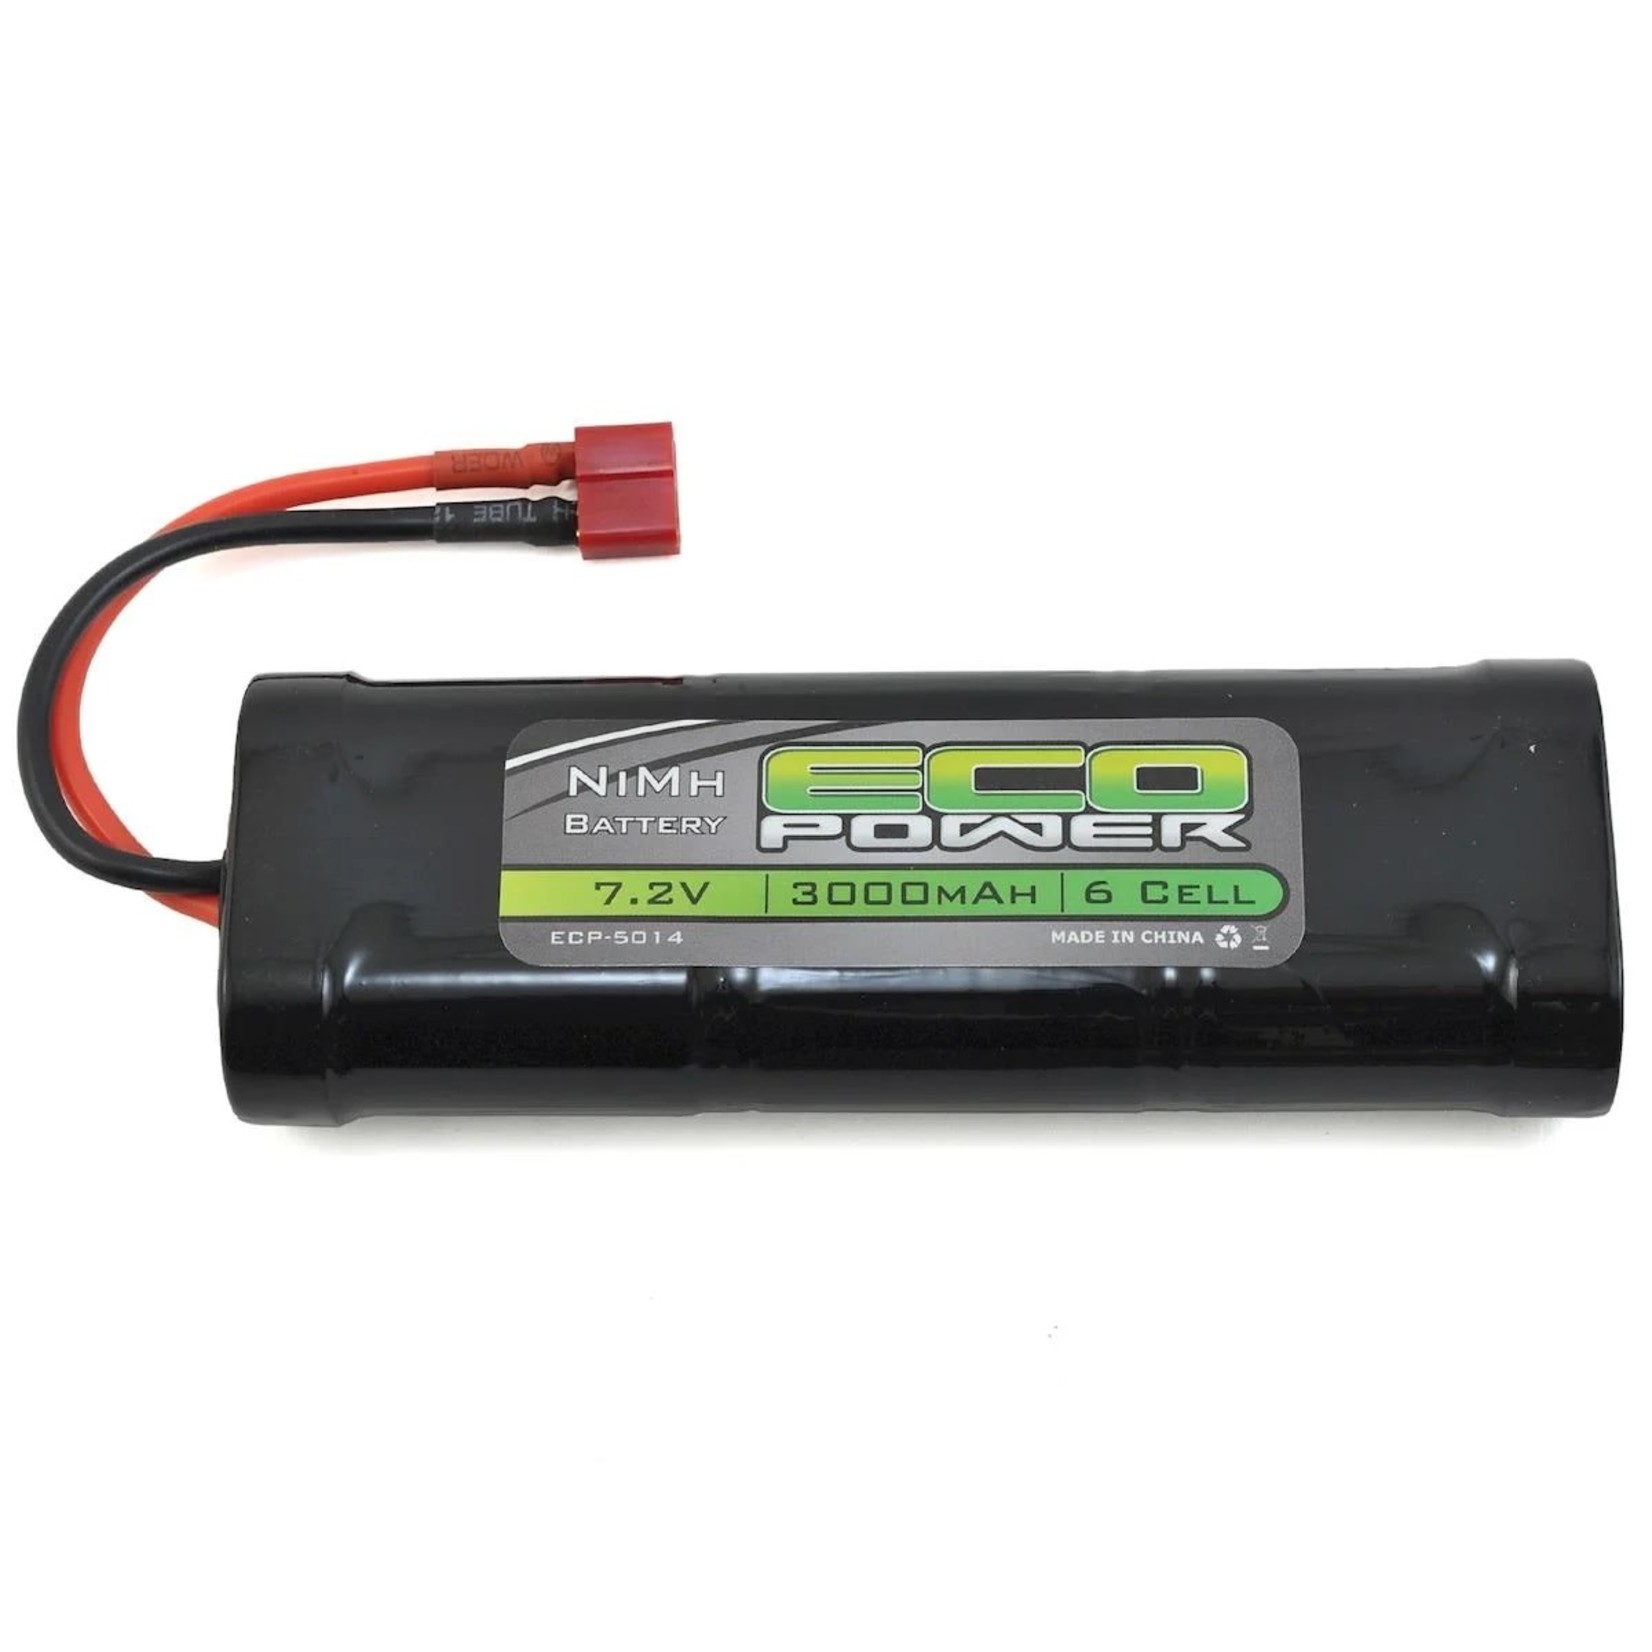 EcoPower EcoPower 6-Cell NiMH Stick Pack Battery w/T-Style Connector (7.2V/3000mAh) #ECP-5014